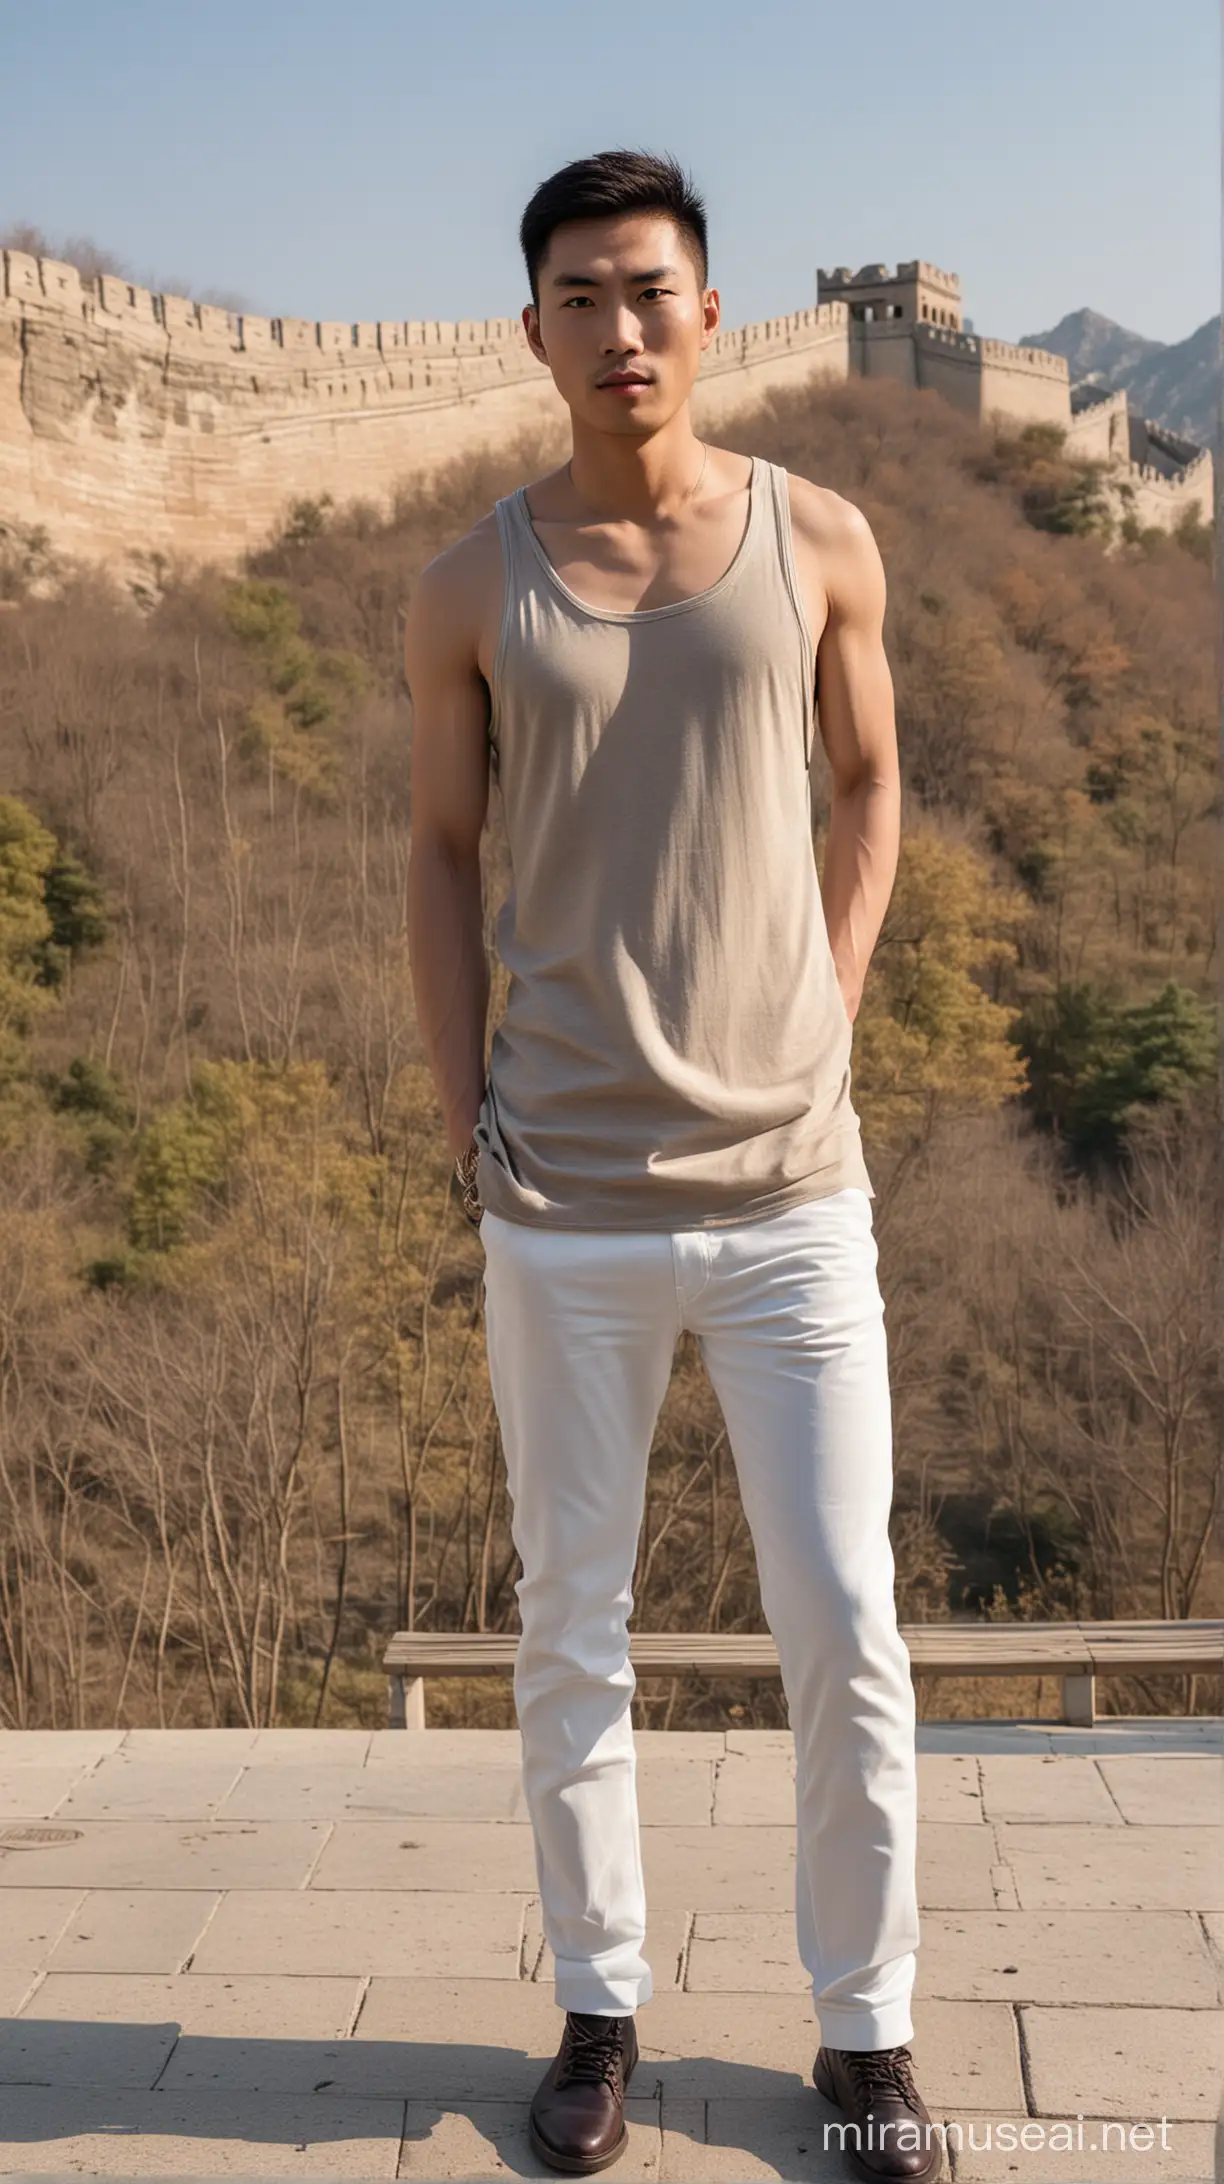 Stylish Chinese Man in Tight Clothing at Beijing Scenic Spot